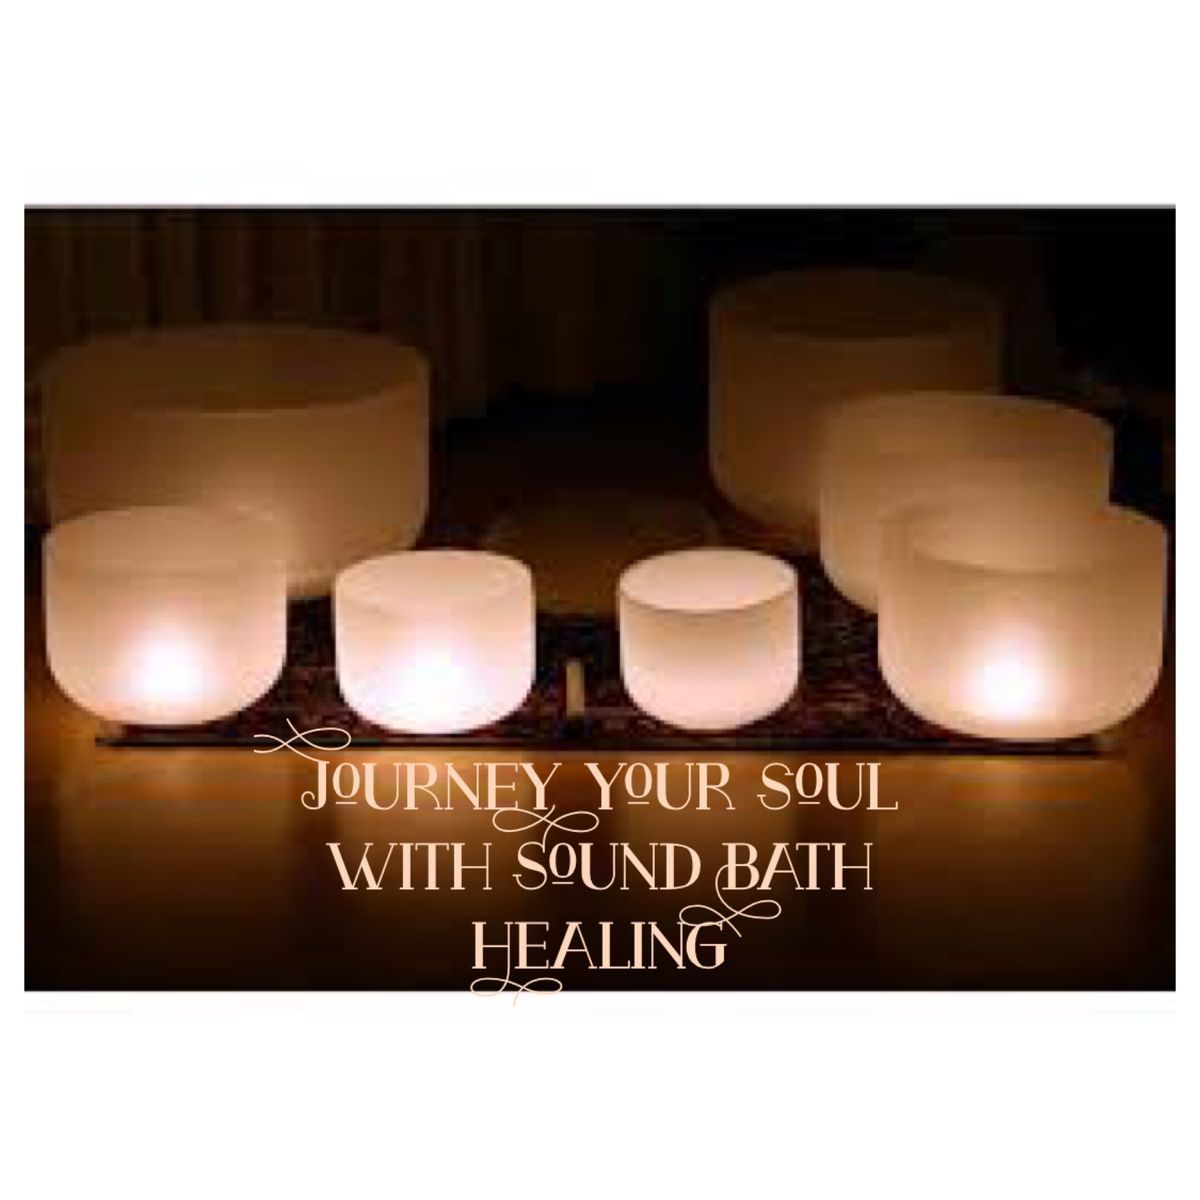 Journey your Soul with a Sound Bath Healing